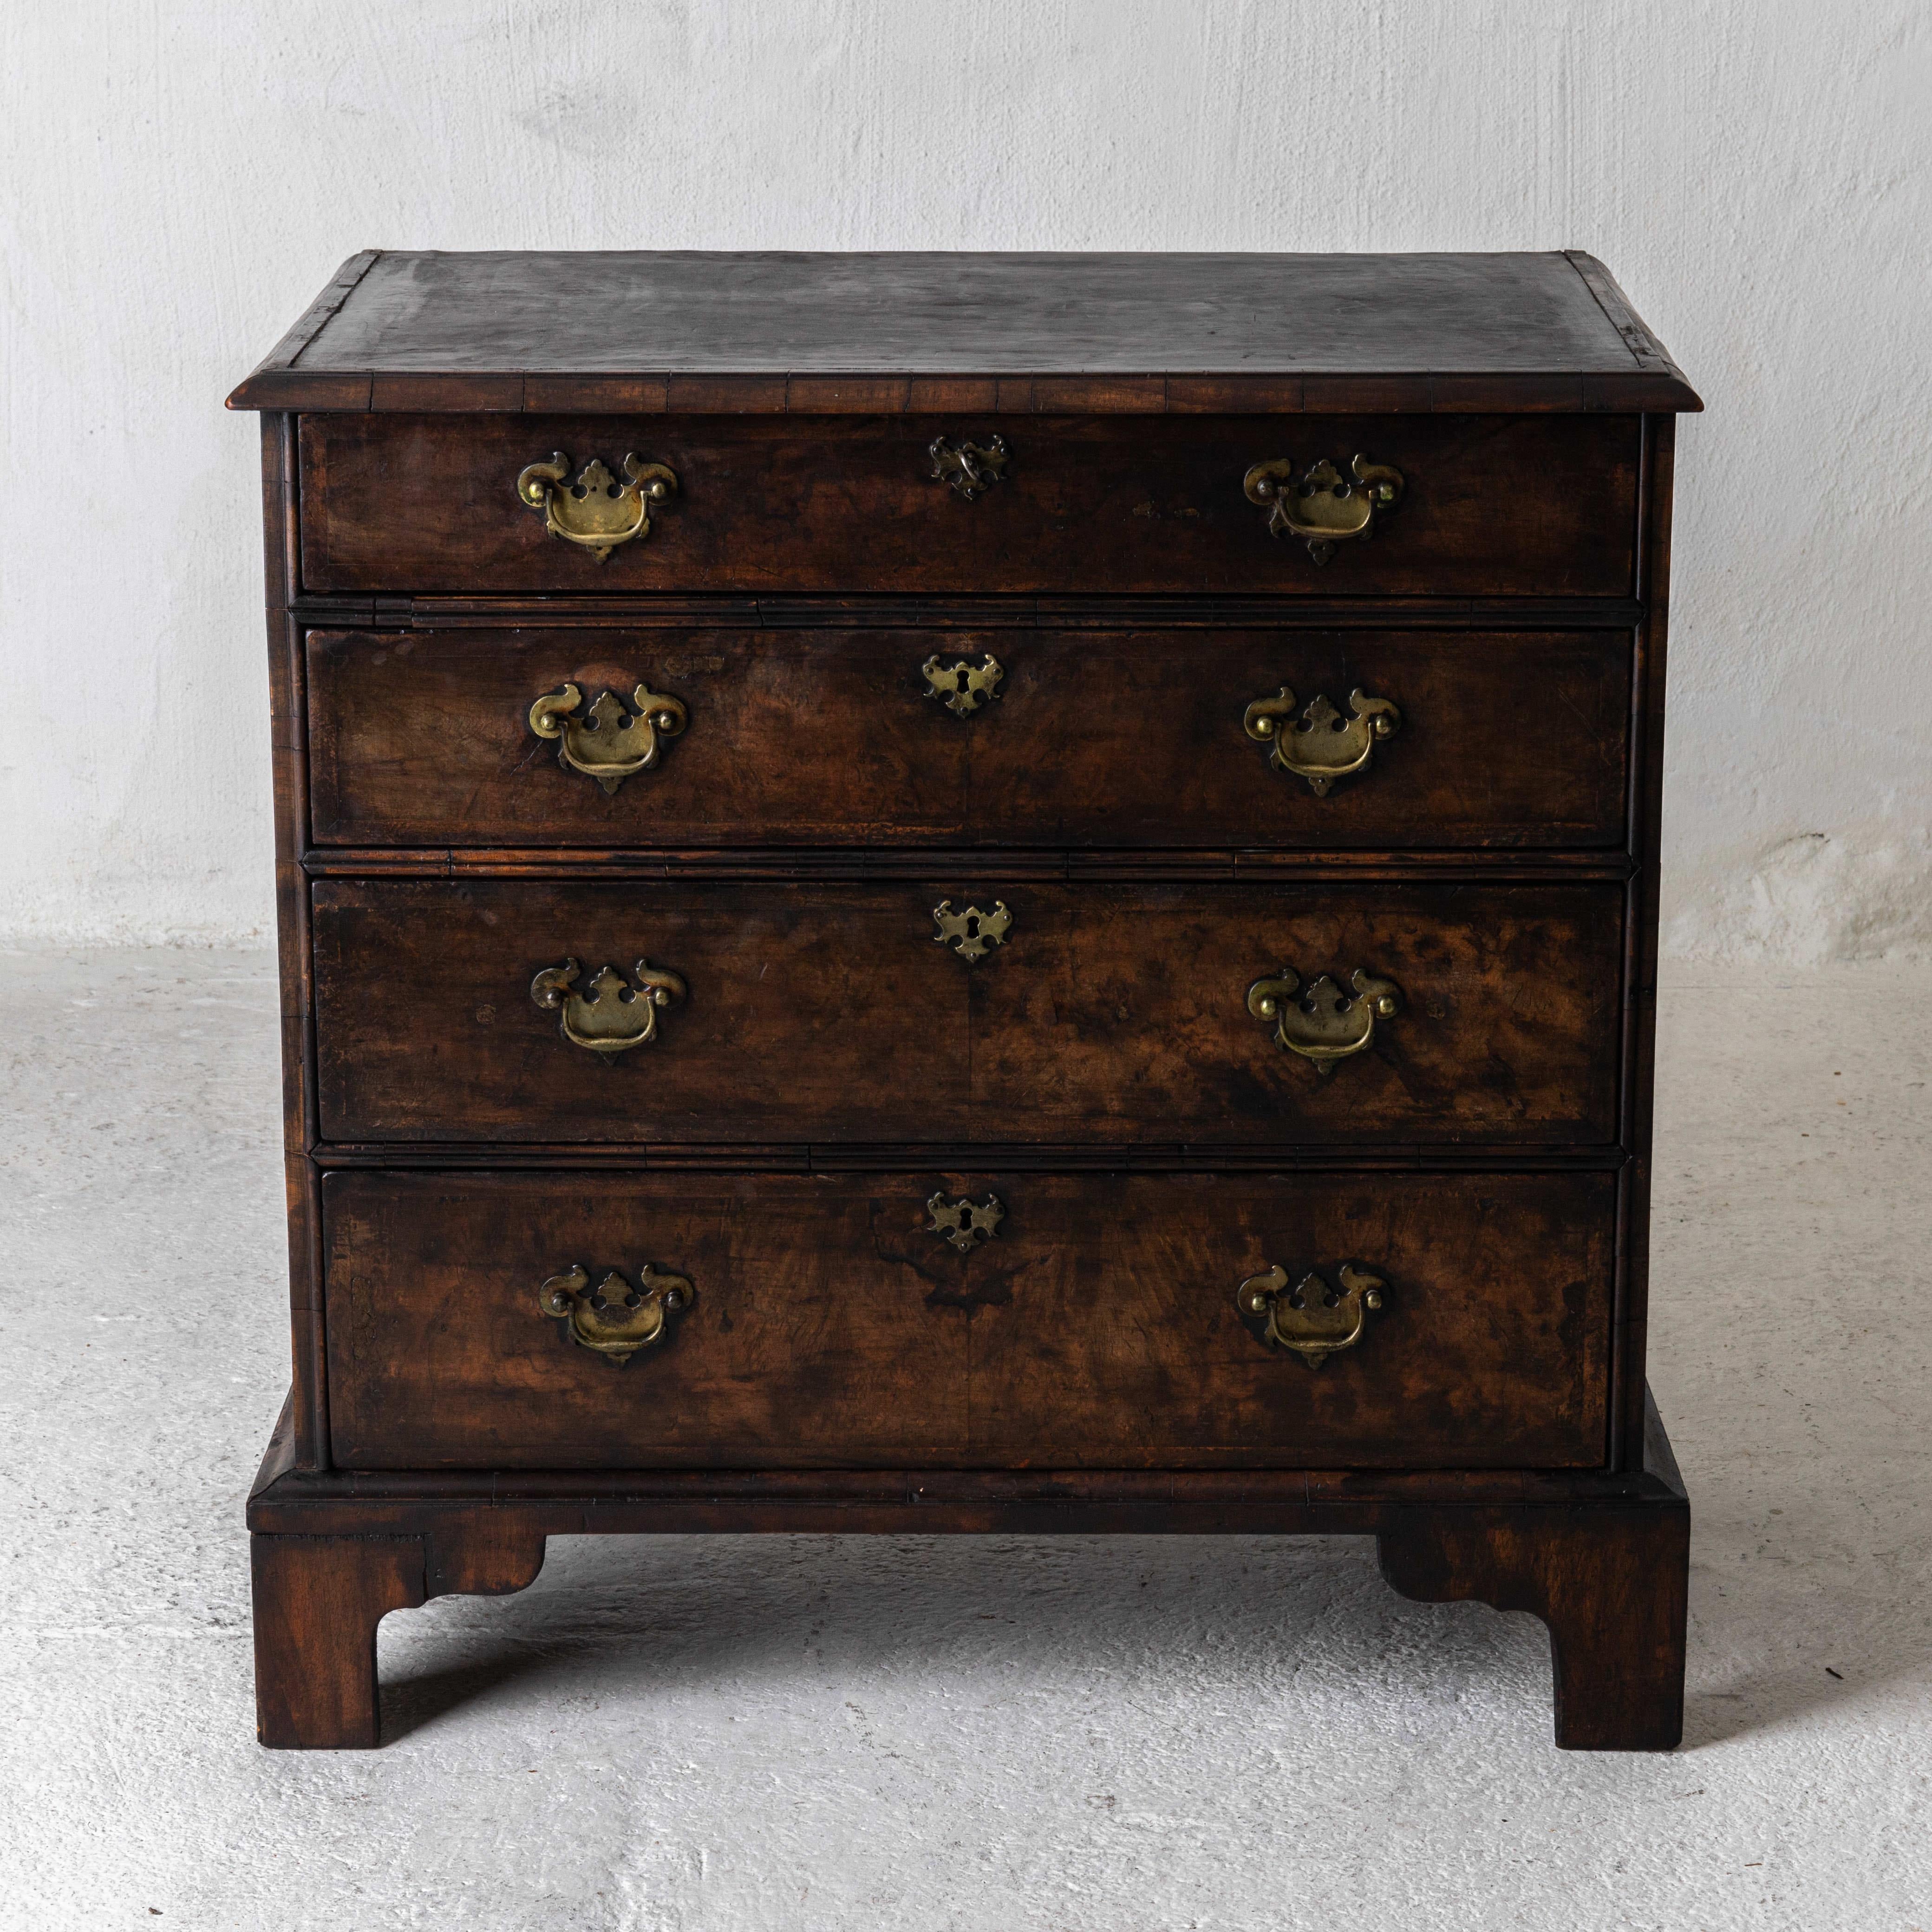 A chest of drawers made during the 19th century in England. Dark brown with brass hardware. A total of 4 drawers. Leather inlay on the top.